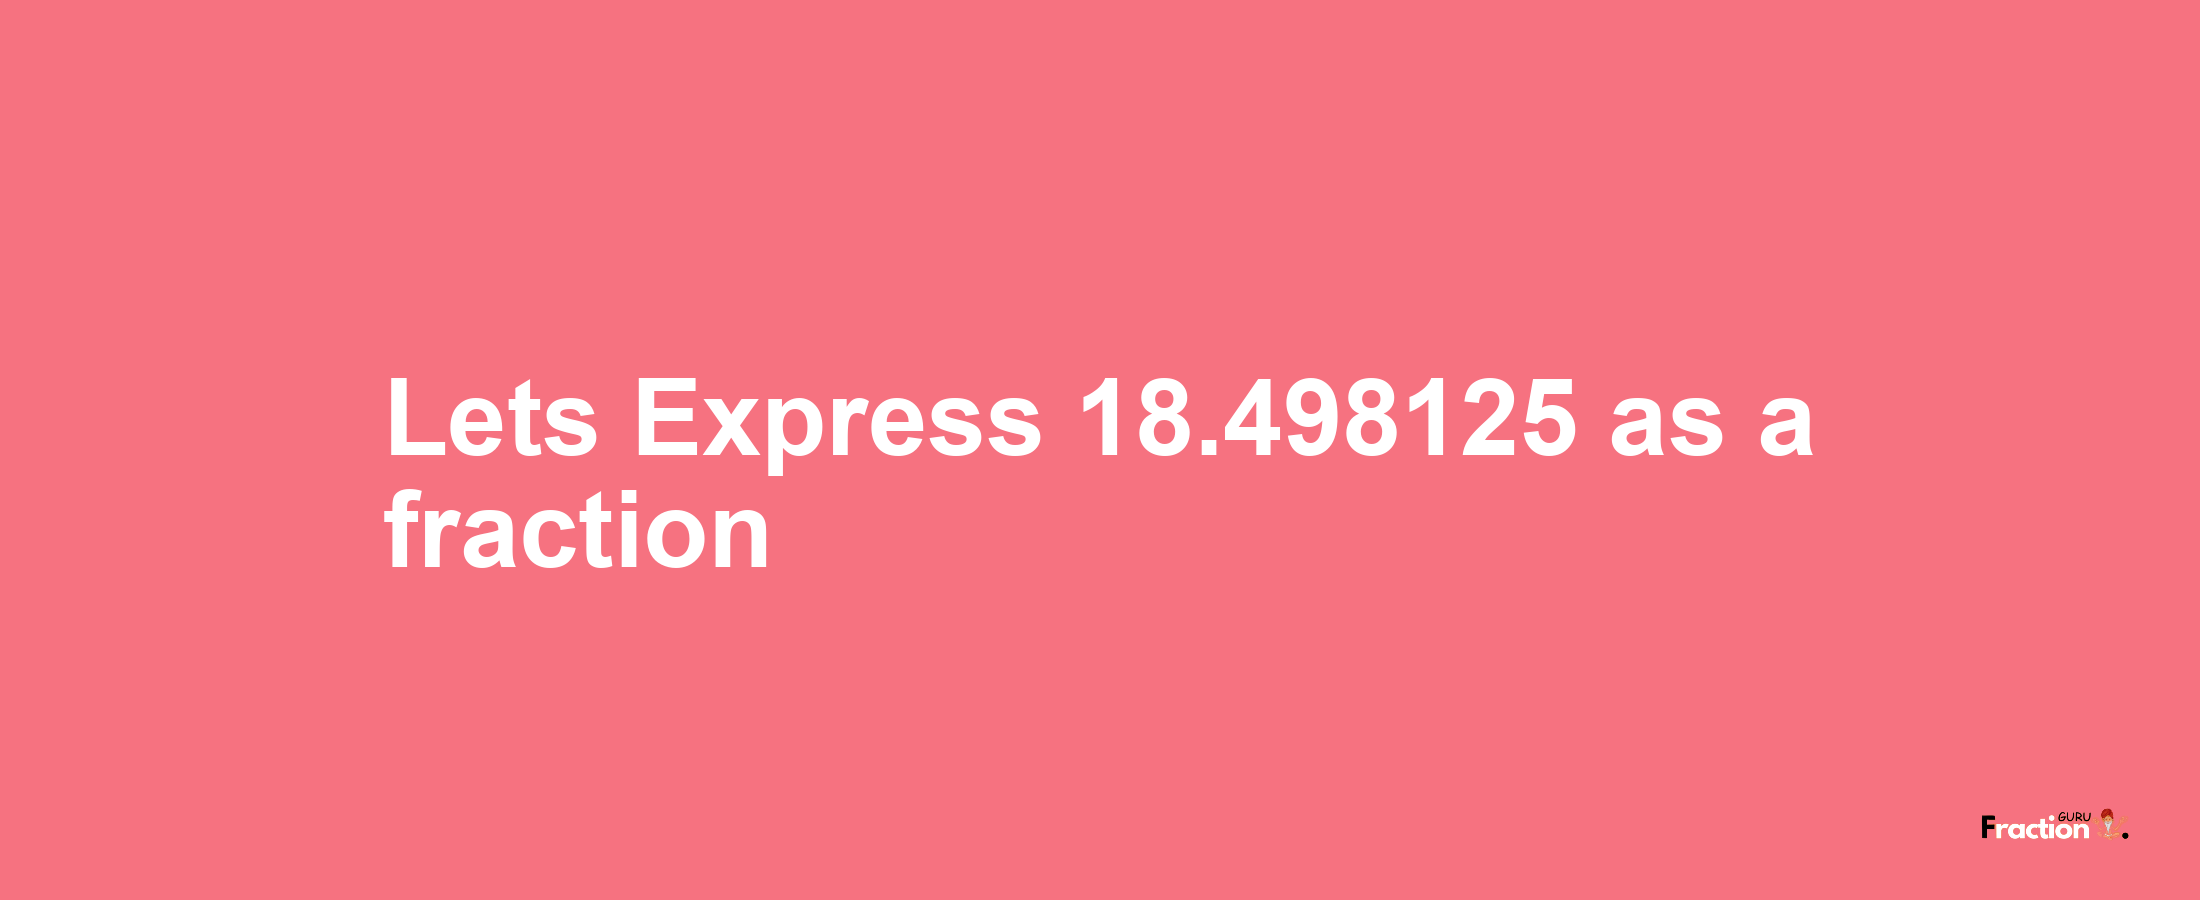 Lets Express 18.498125 as afraction